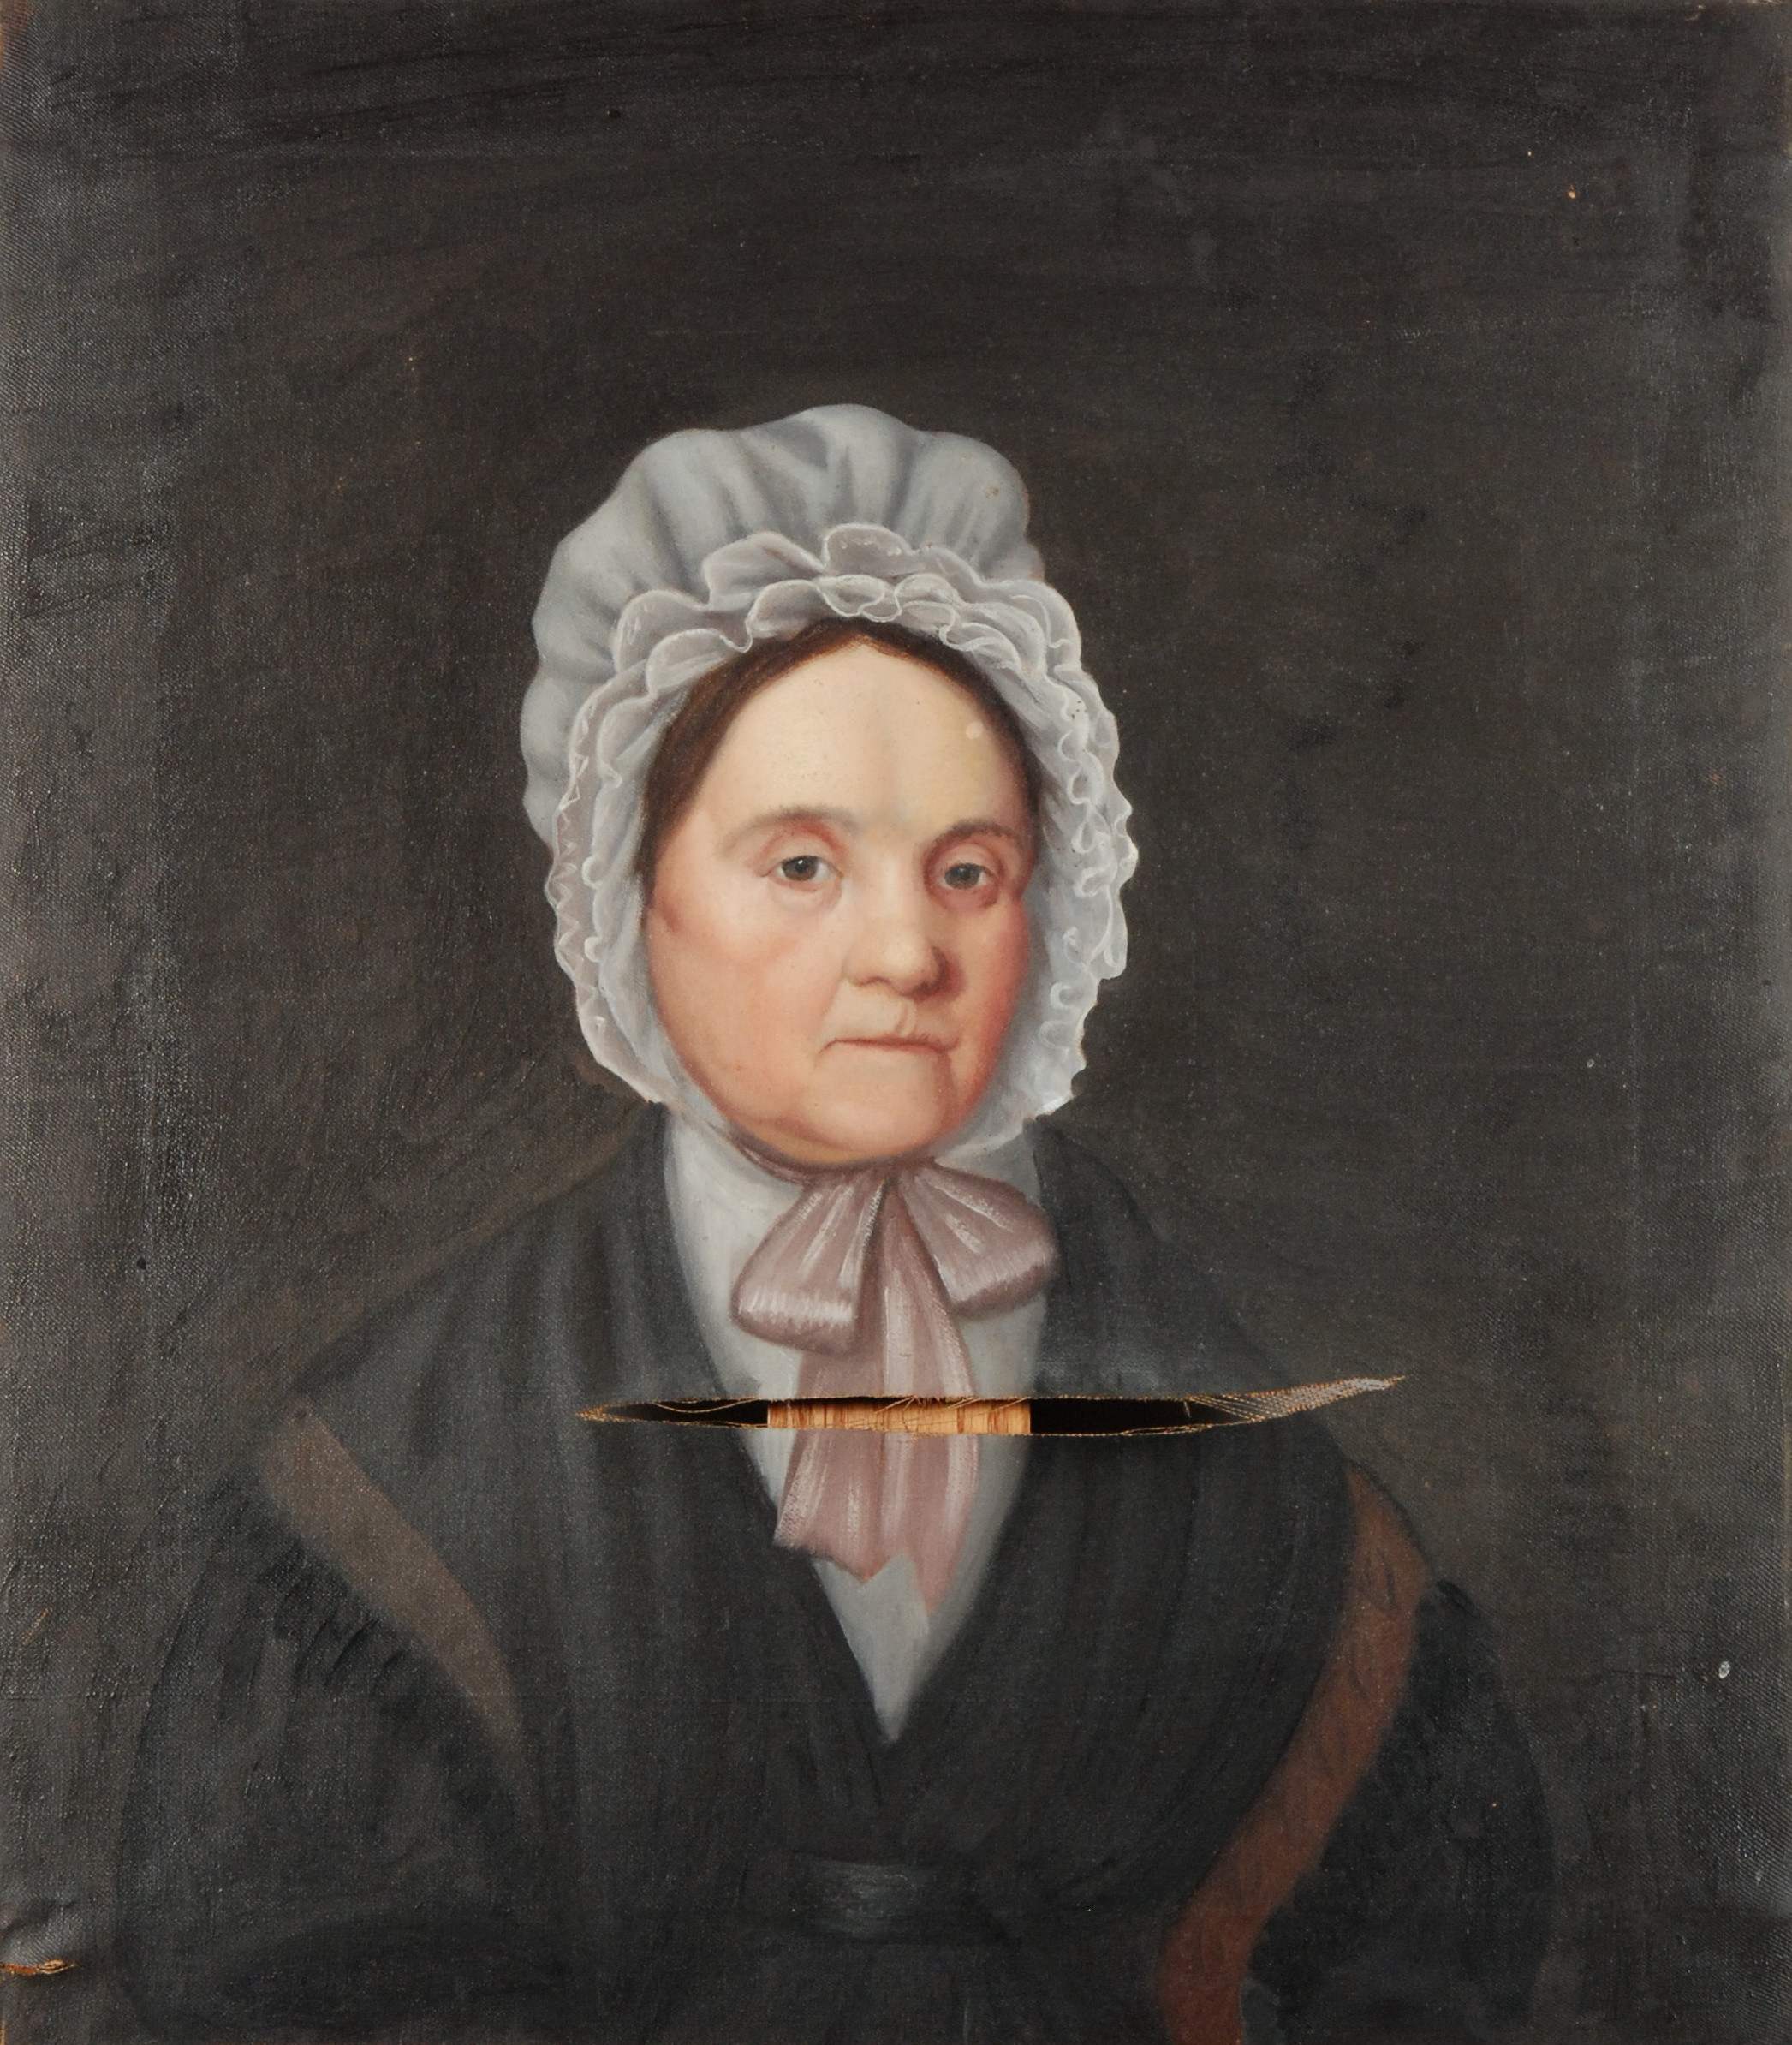 Unidentified Artist, Portrait of Mrs. Willoughby, c. 1830, oil on canvas, with large open tear